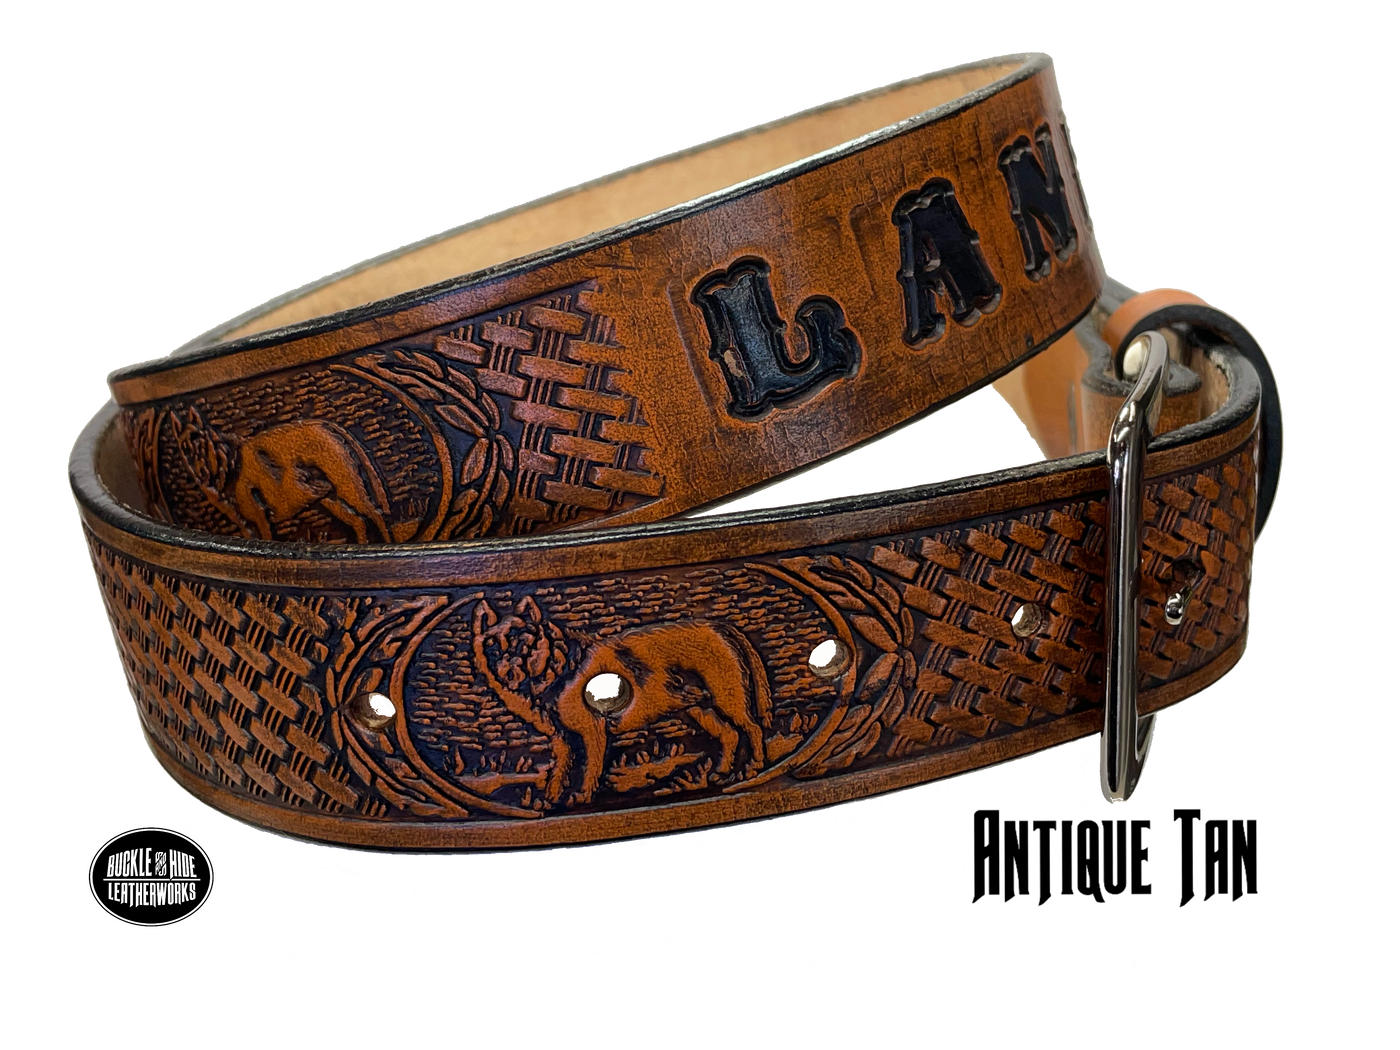 Full grain American vegetable tanned cowhide approx. 1/8"thick. Width 1 1/2" and includes Antique Nickle plated Solid Brass buckle Hand Finished in 3 color options Smooth burnished painted edges Choose with or without name, if without name, design will cover entire length of belt For name Type name desired on belt in "Type Name Here" section, no more than 8 letters maximum Buckle snaps in place for easy changing if desired Made in our Smyrna, TN, USA shop Belt Sizing Instructions